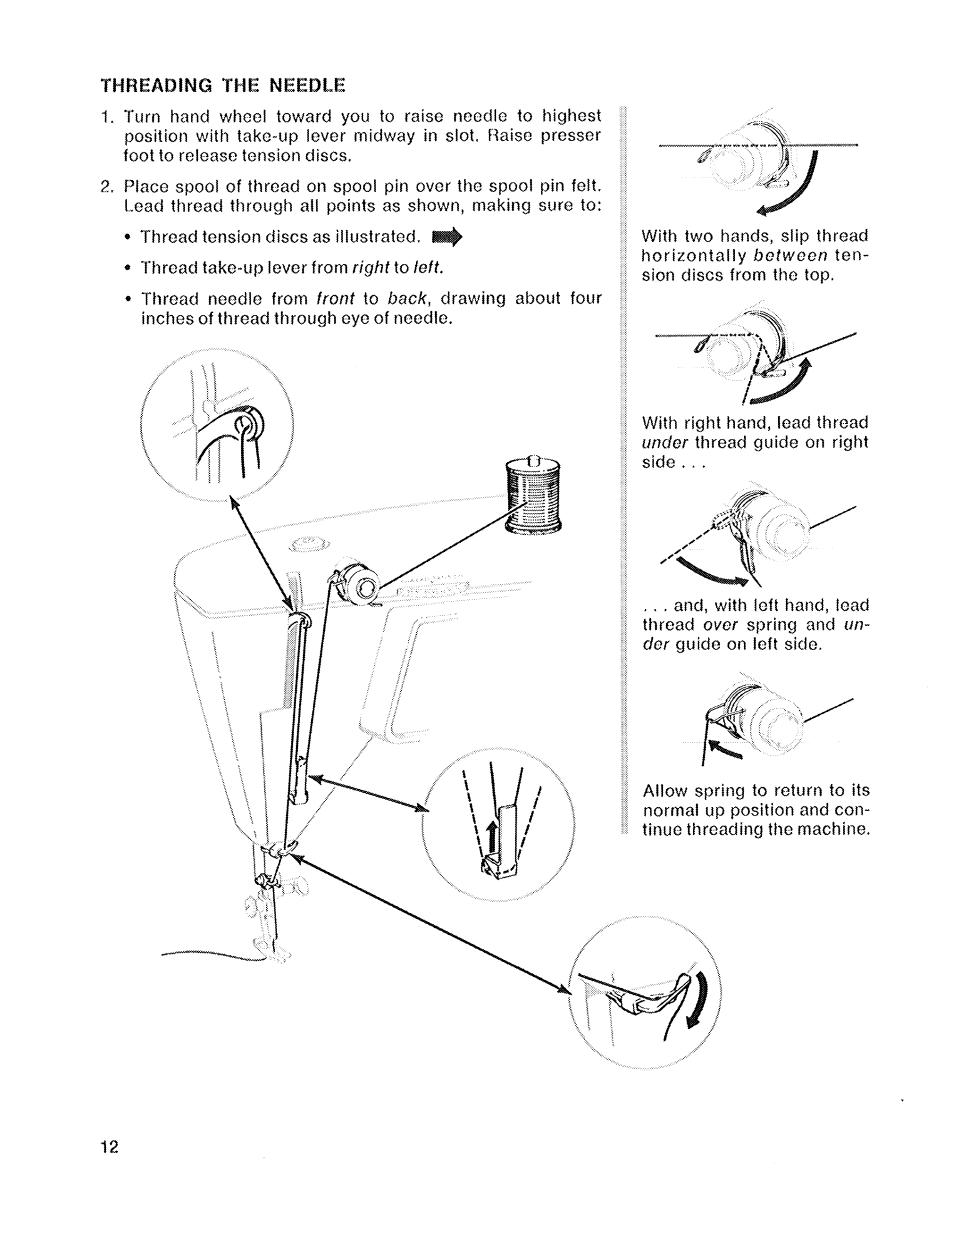 Threading the needle, Threading the machine | SINGER 719 User Manual | Page 14 / 36